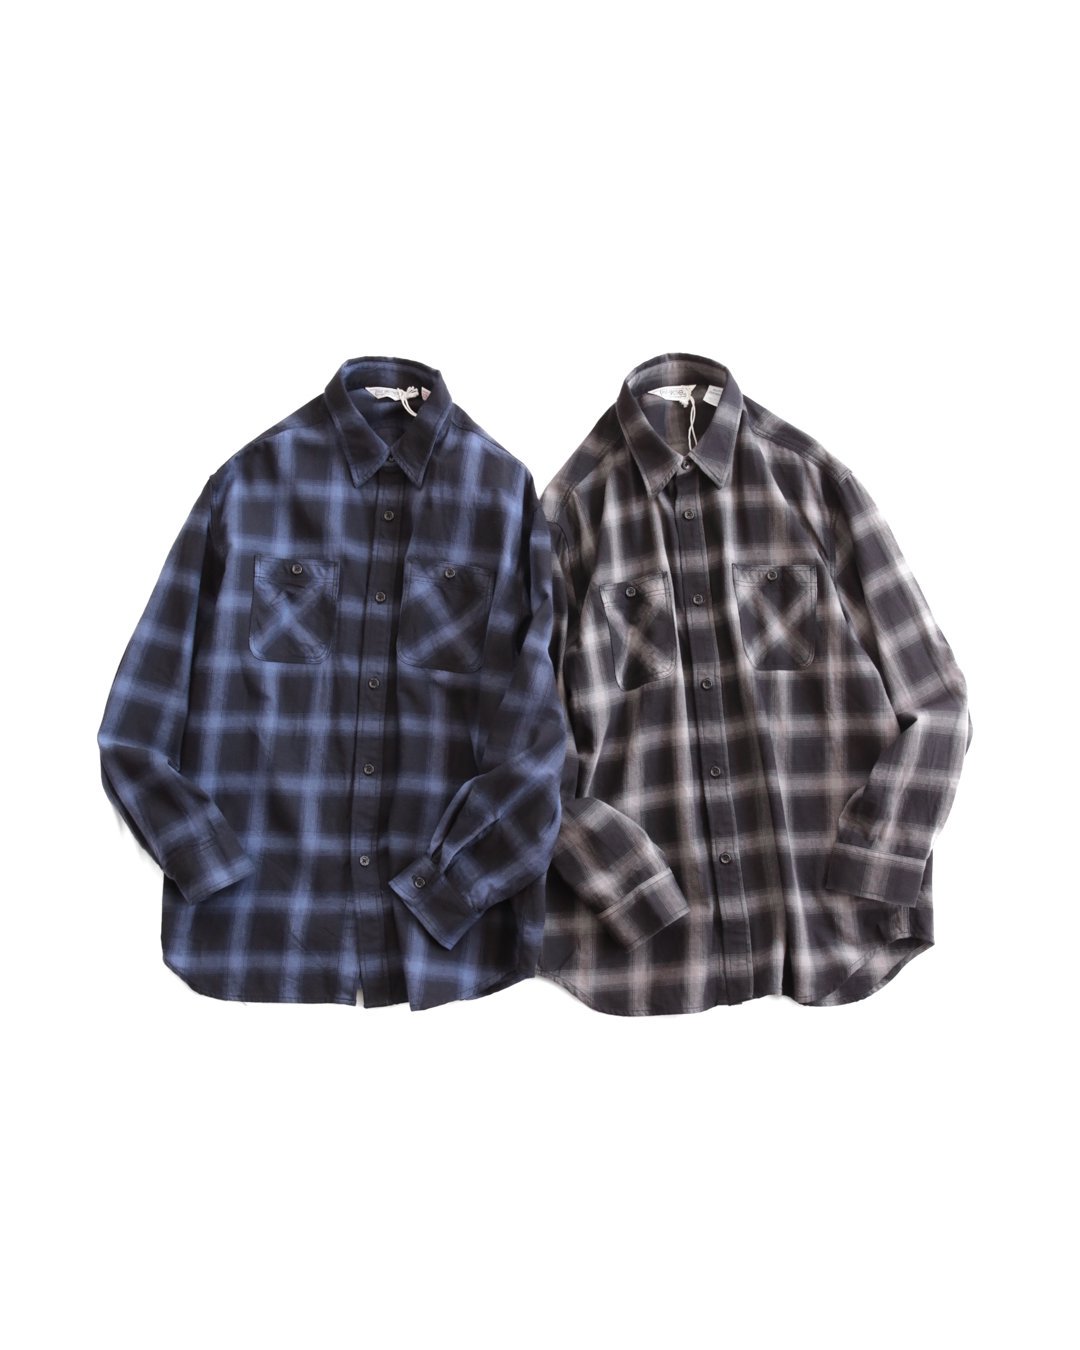 FIVE BROTHER / WORK SHIRTS [WIDE] OMBRE - Blue, Black